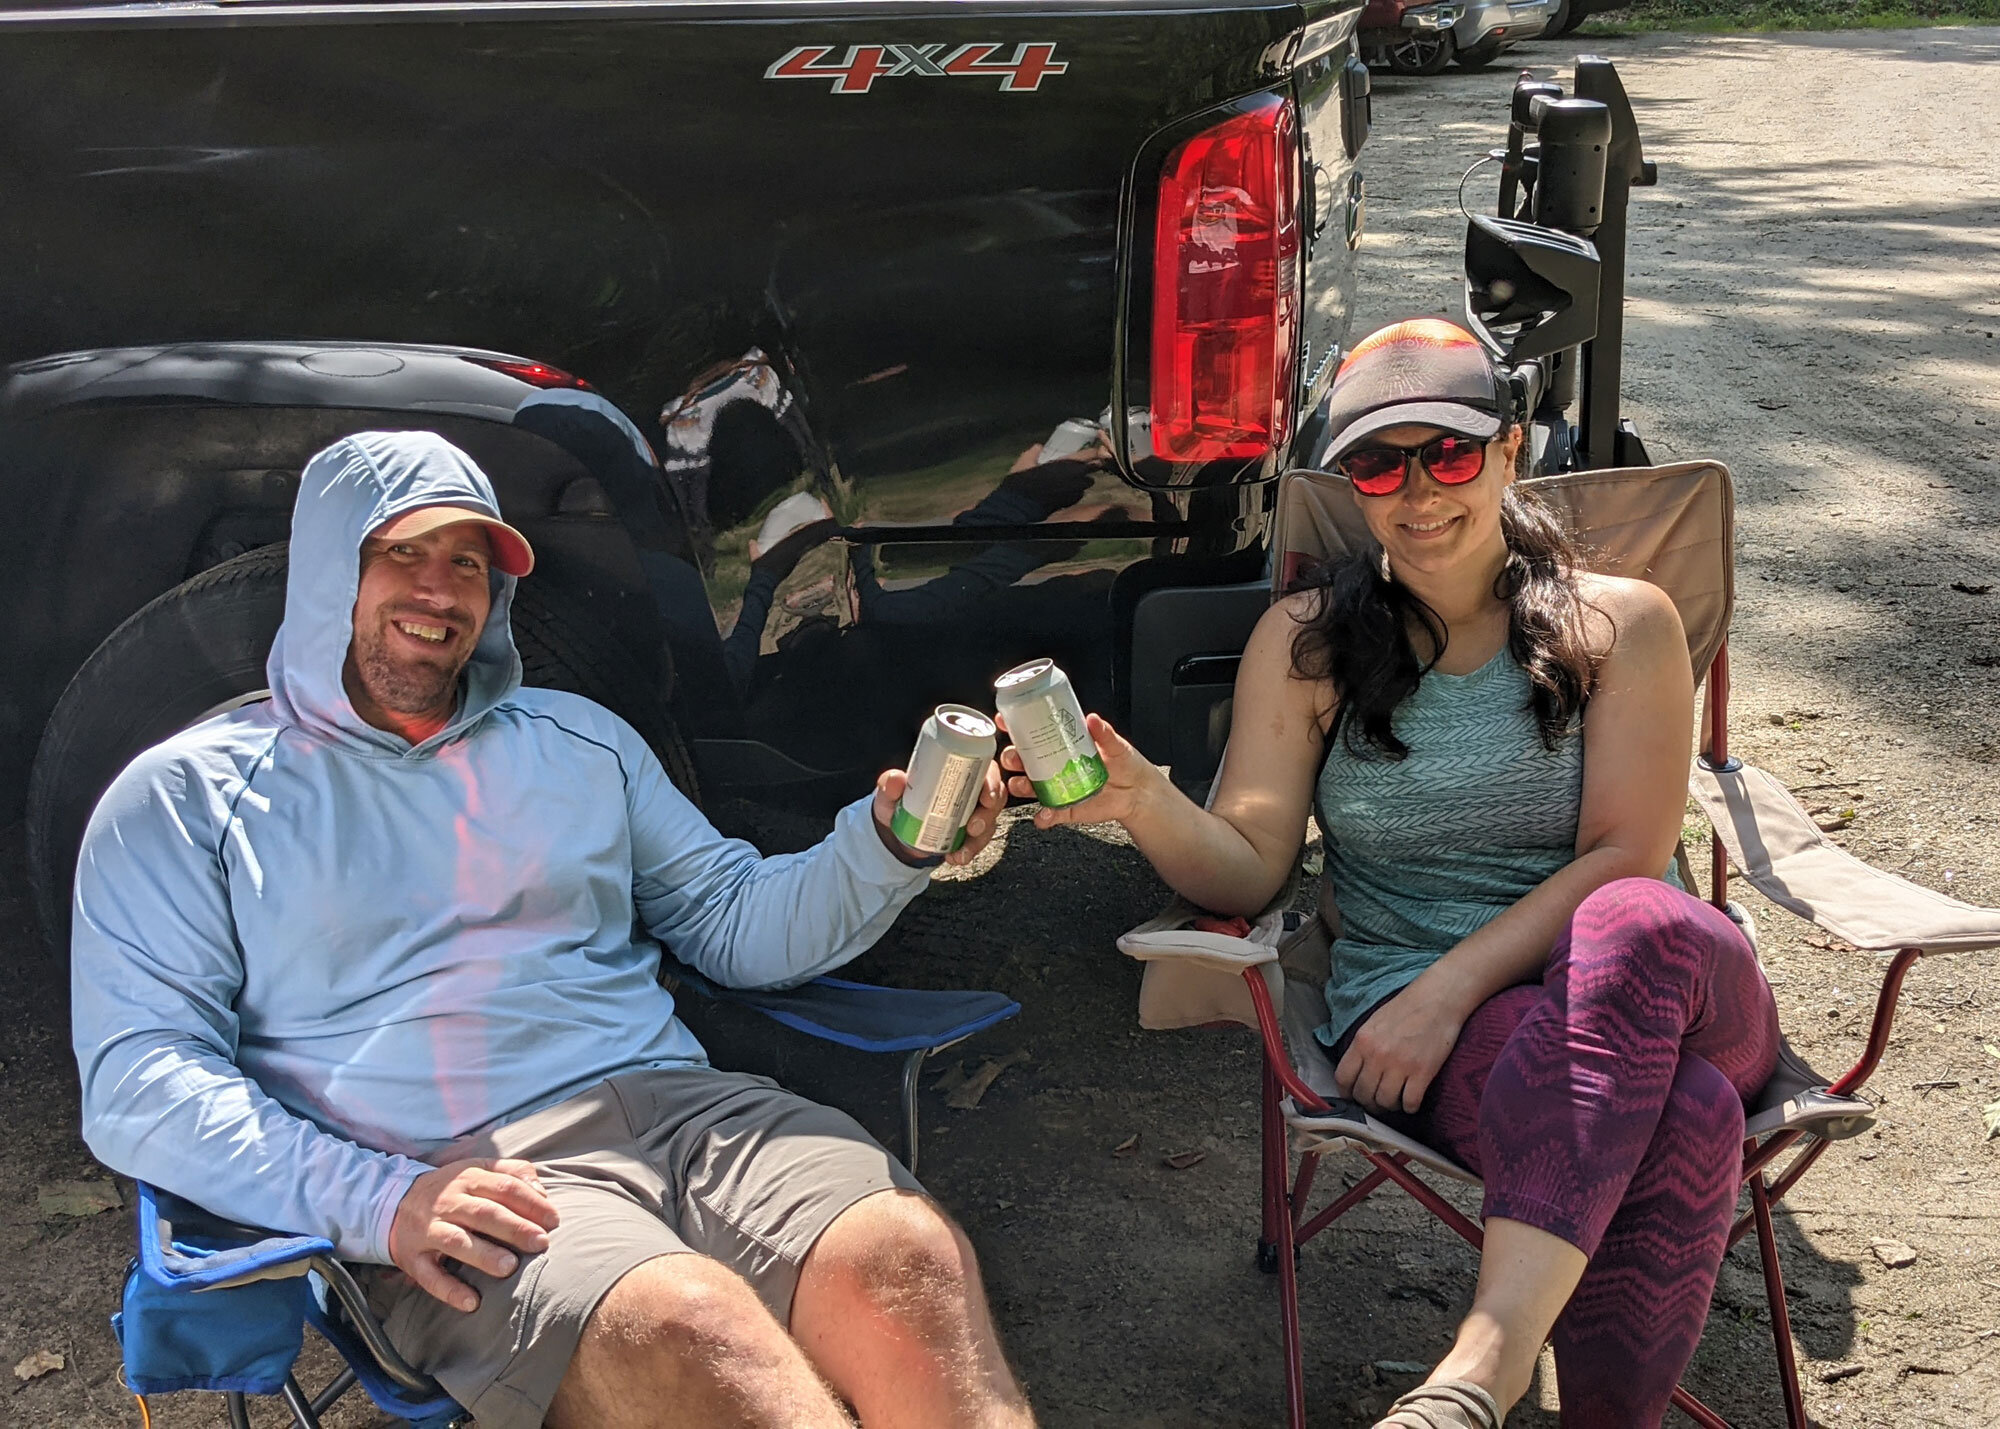 Parking Lot Apres 101: How to Hang After a Day in the Mountains